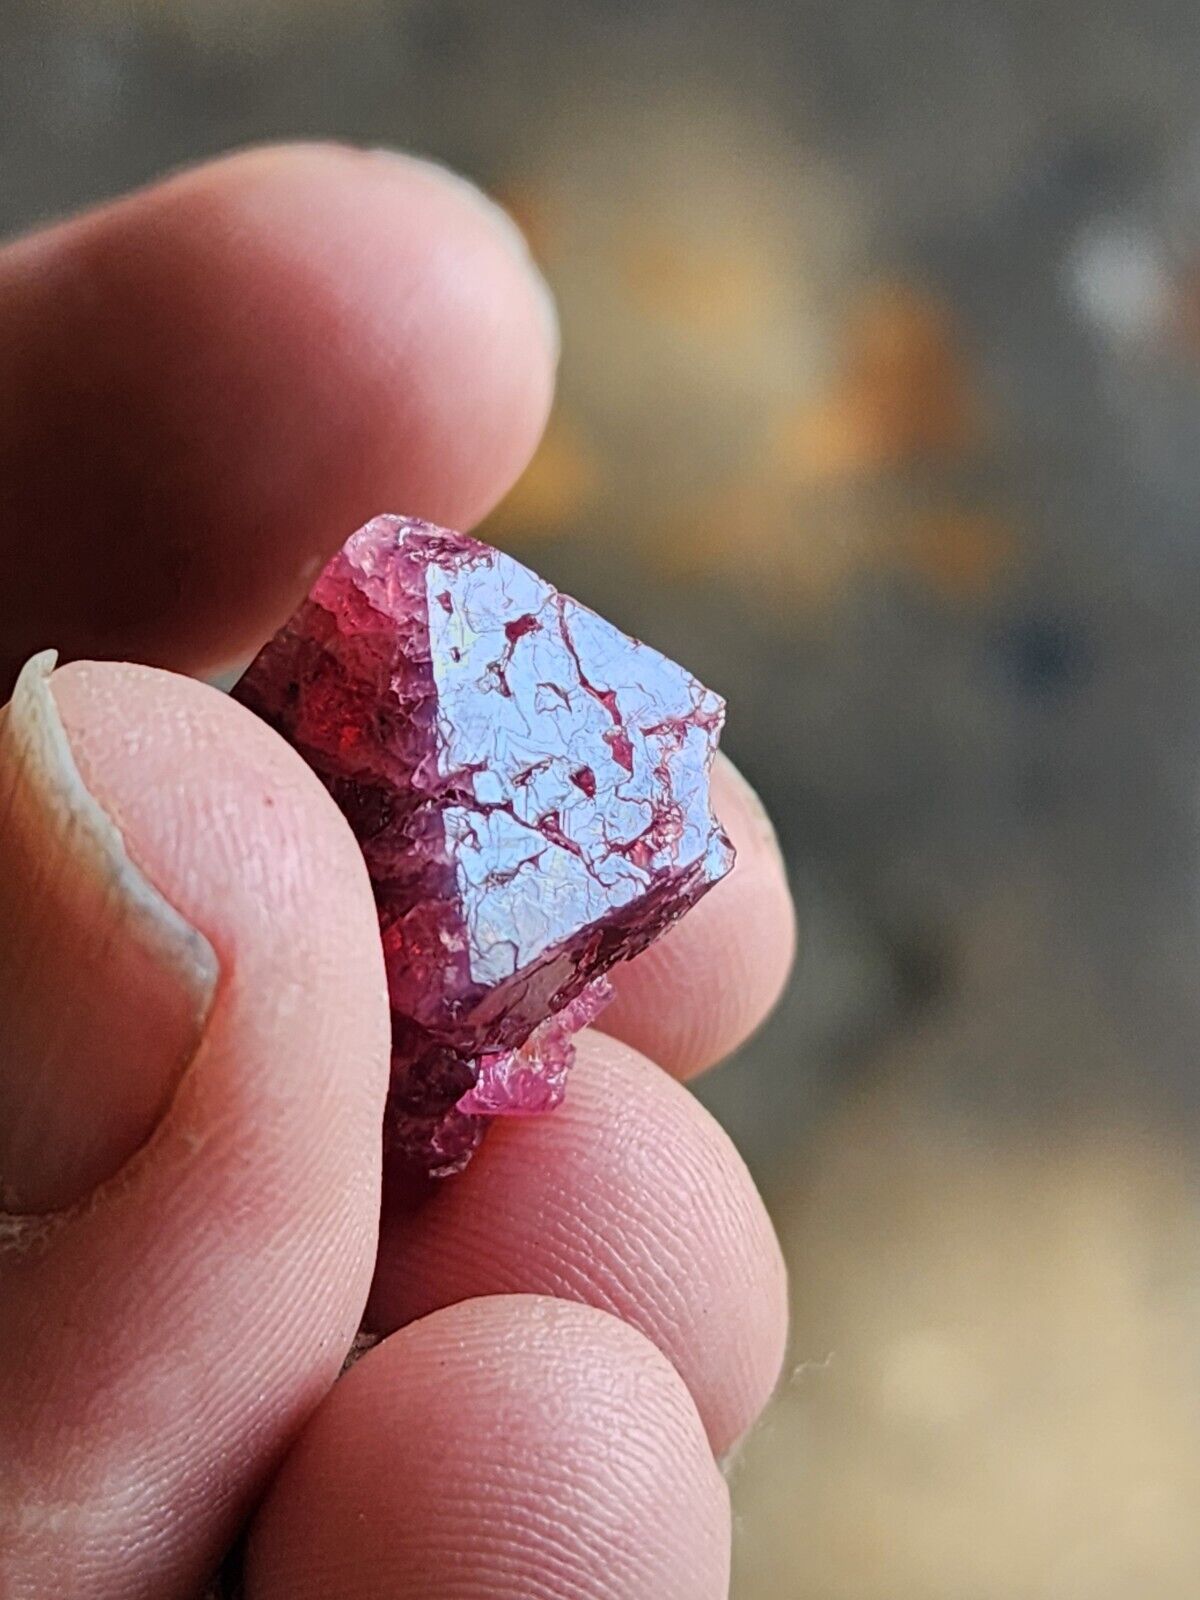 Choice Gemmy Blood-Red Spinel Crystal From Morogoro Tanzania - Fluorescent 8.2gr